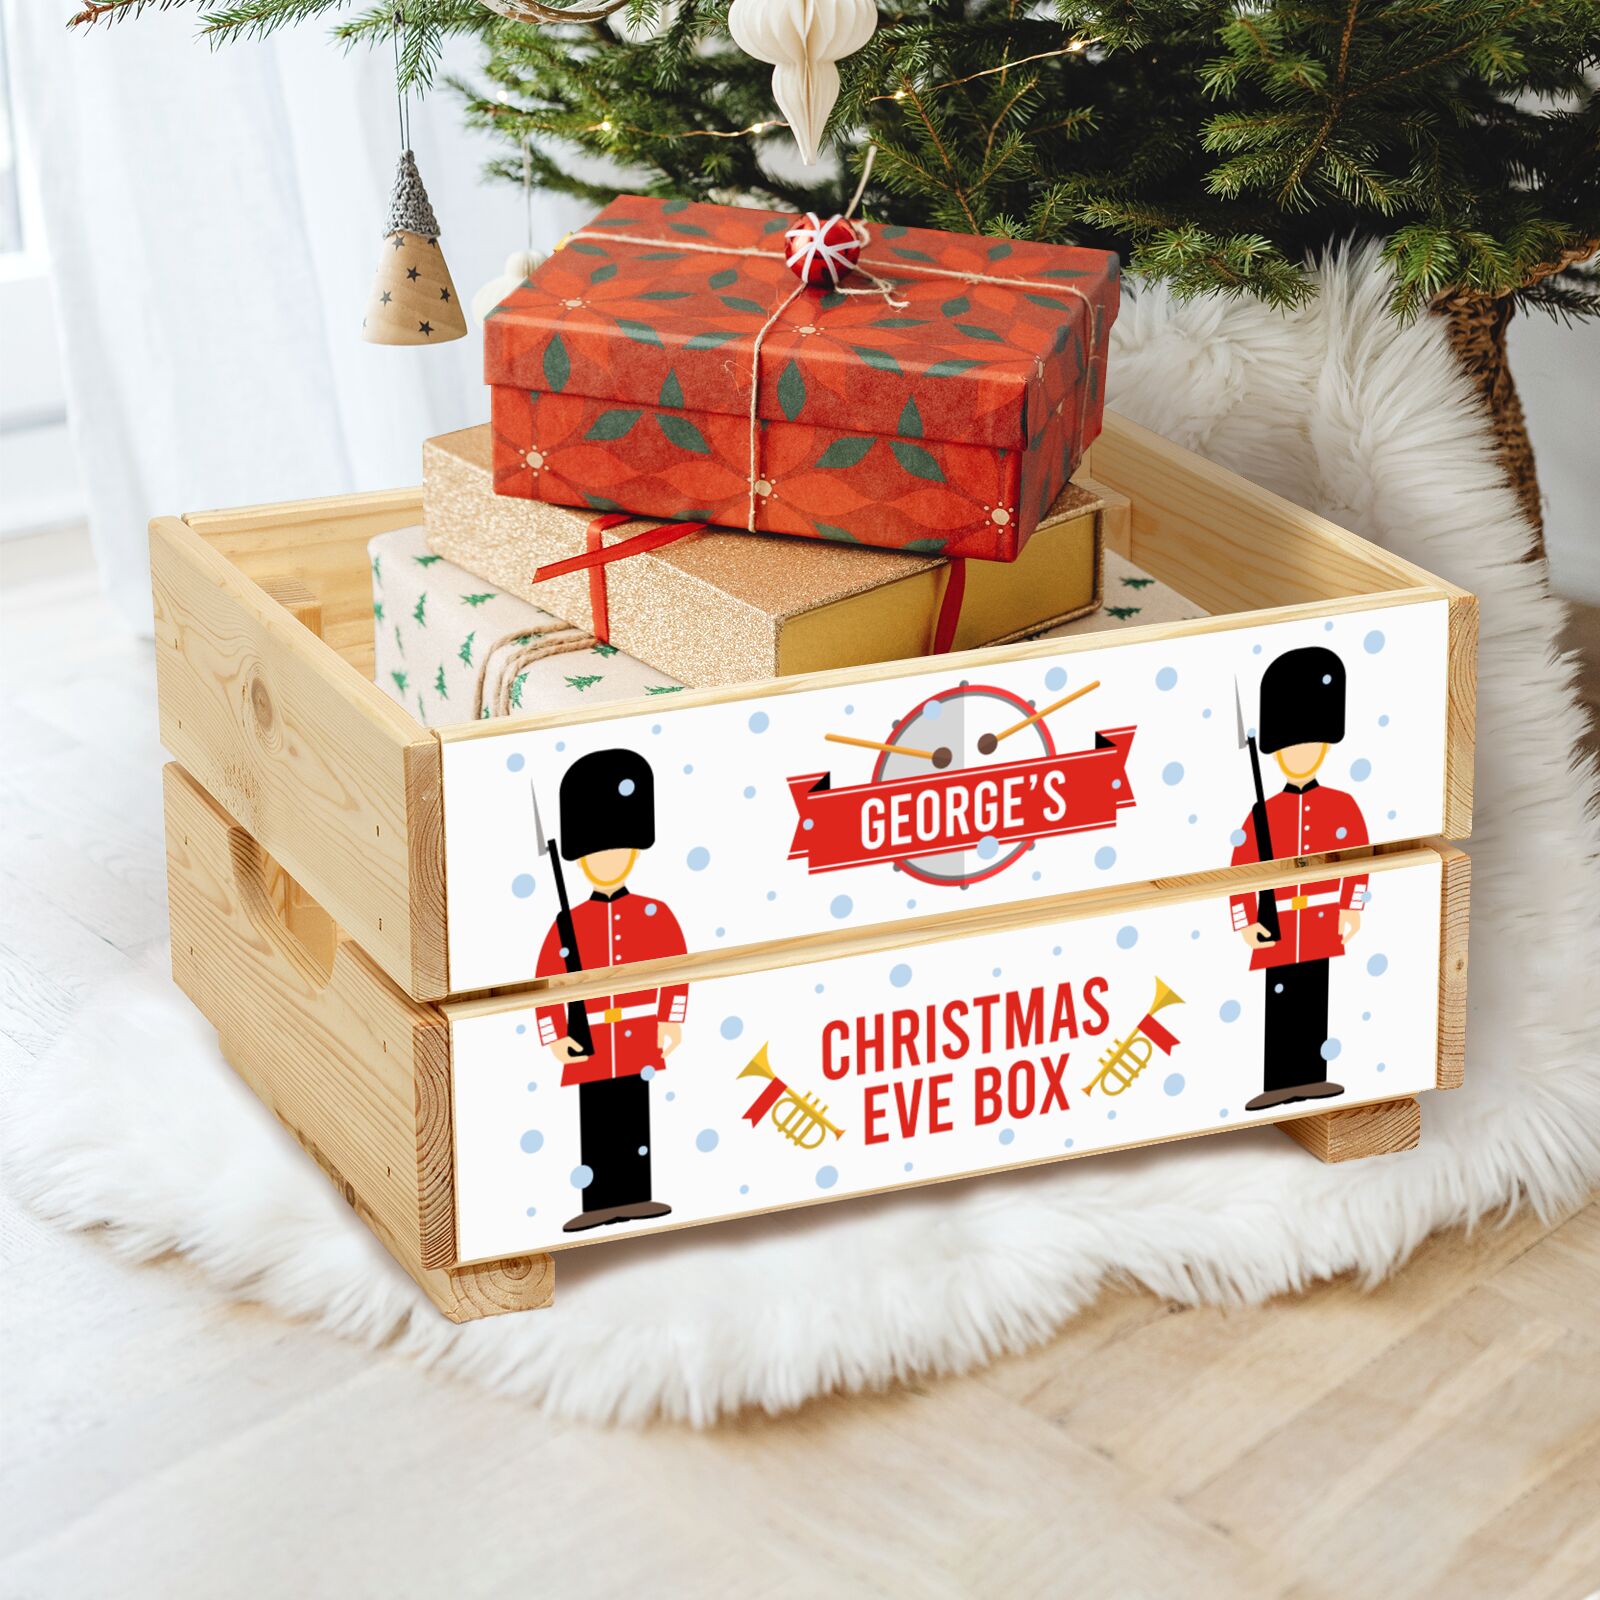 Festive British Guards with Name Christmas Eve Crate Box in Cosy room